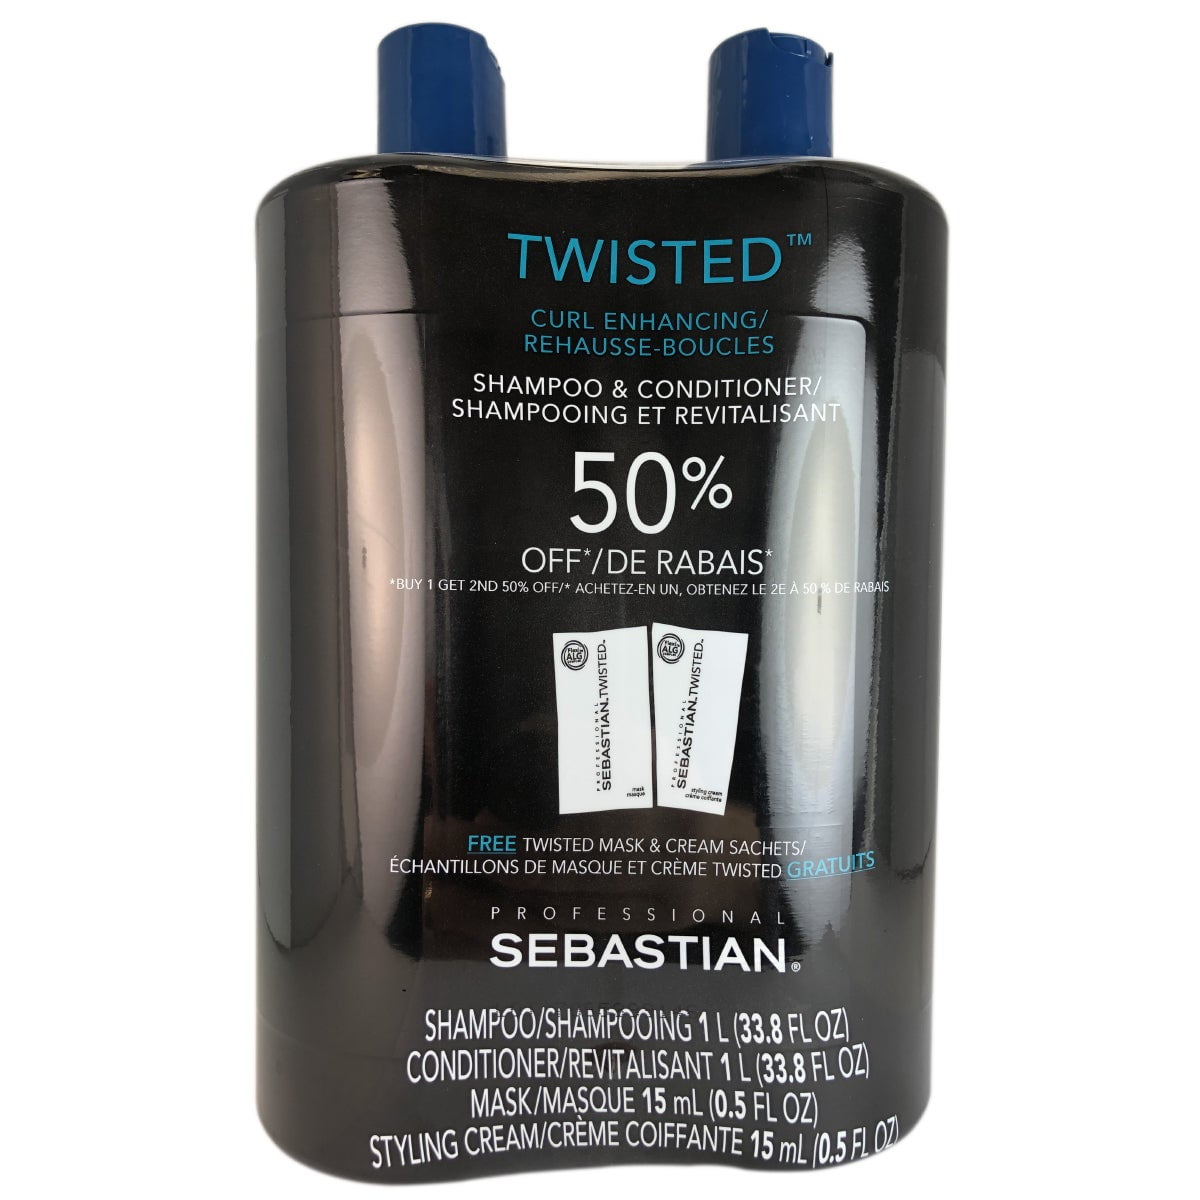 Professional Twisted Shampoo and Conditioner Liter Duo for Curls 33.8 oz Walmart.com